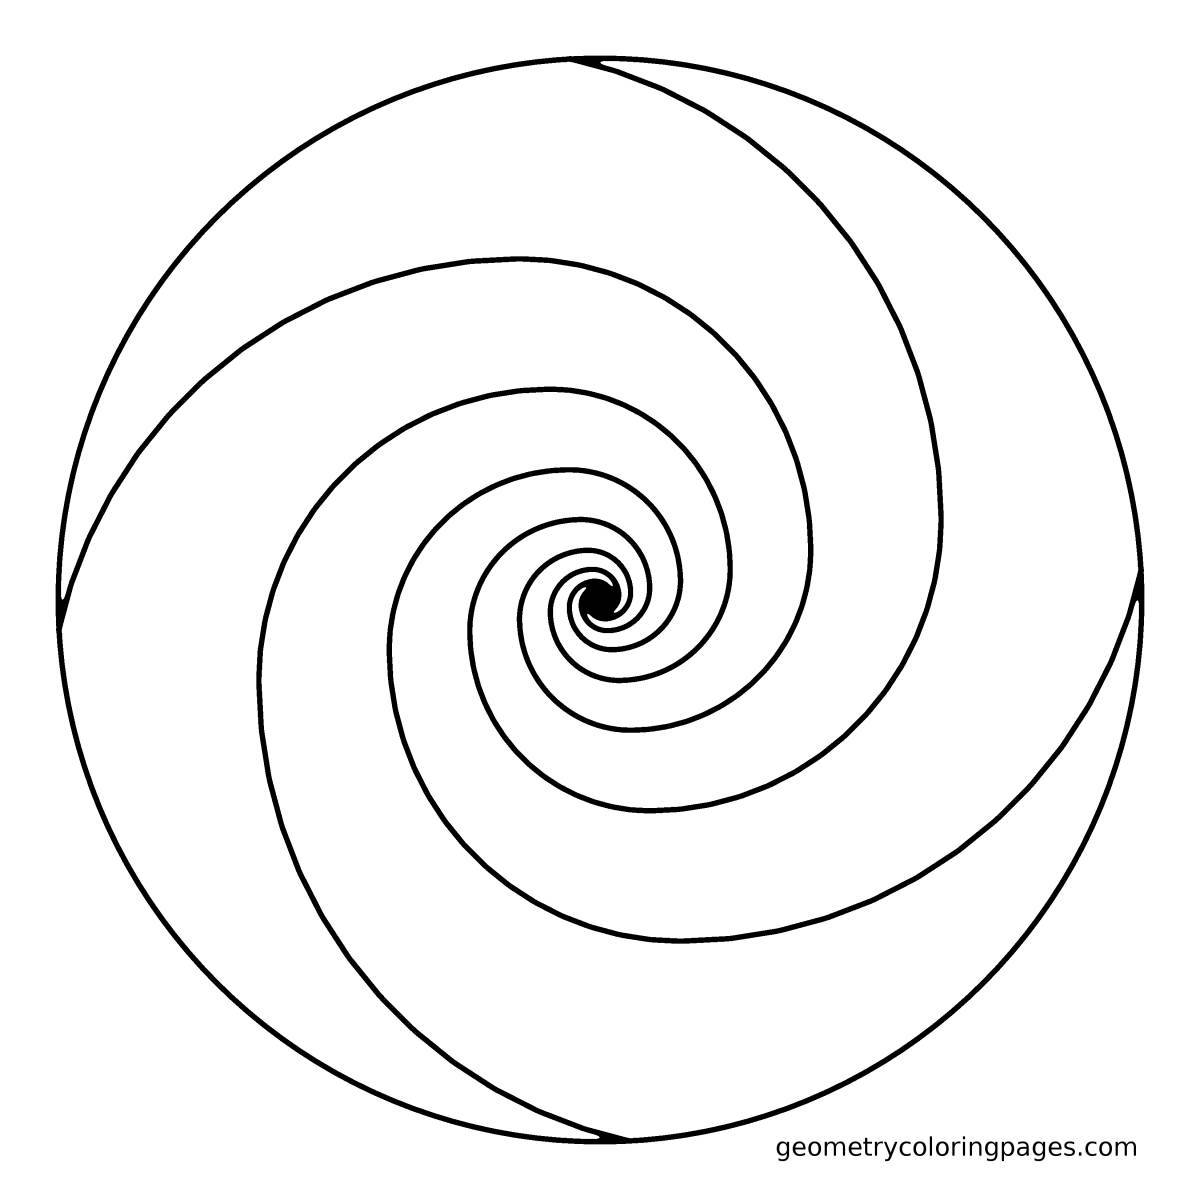 Tempting spiral create coloring page